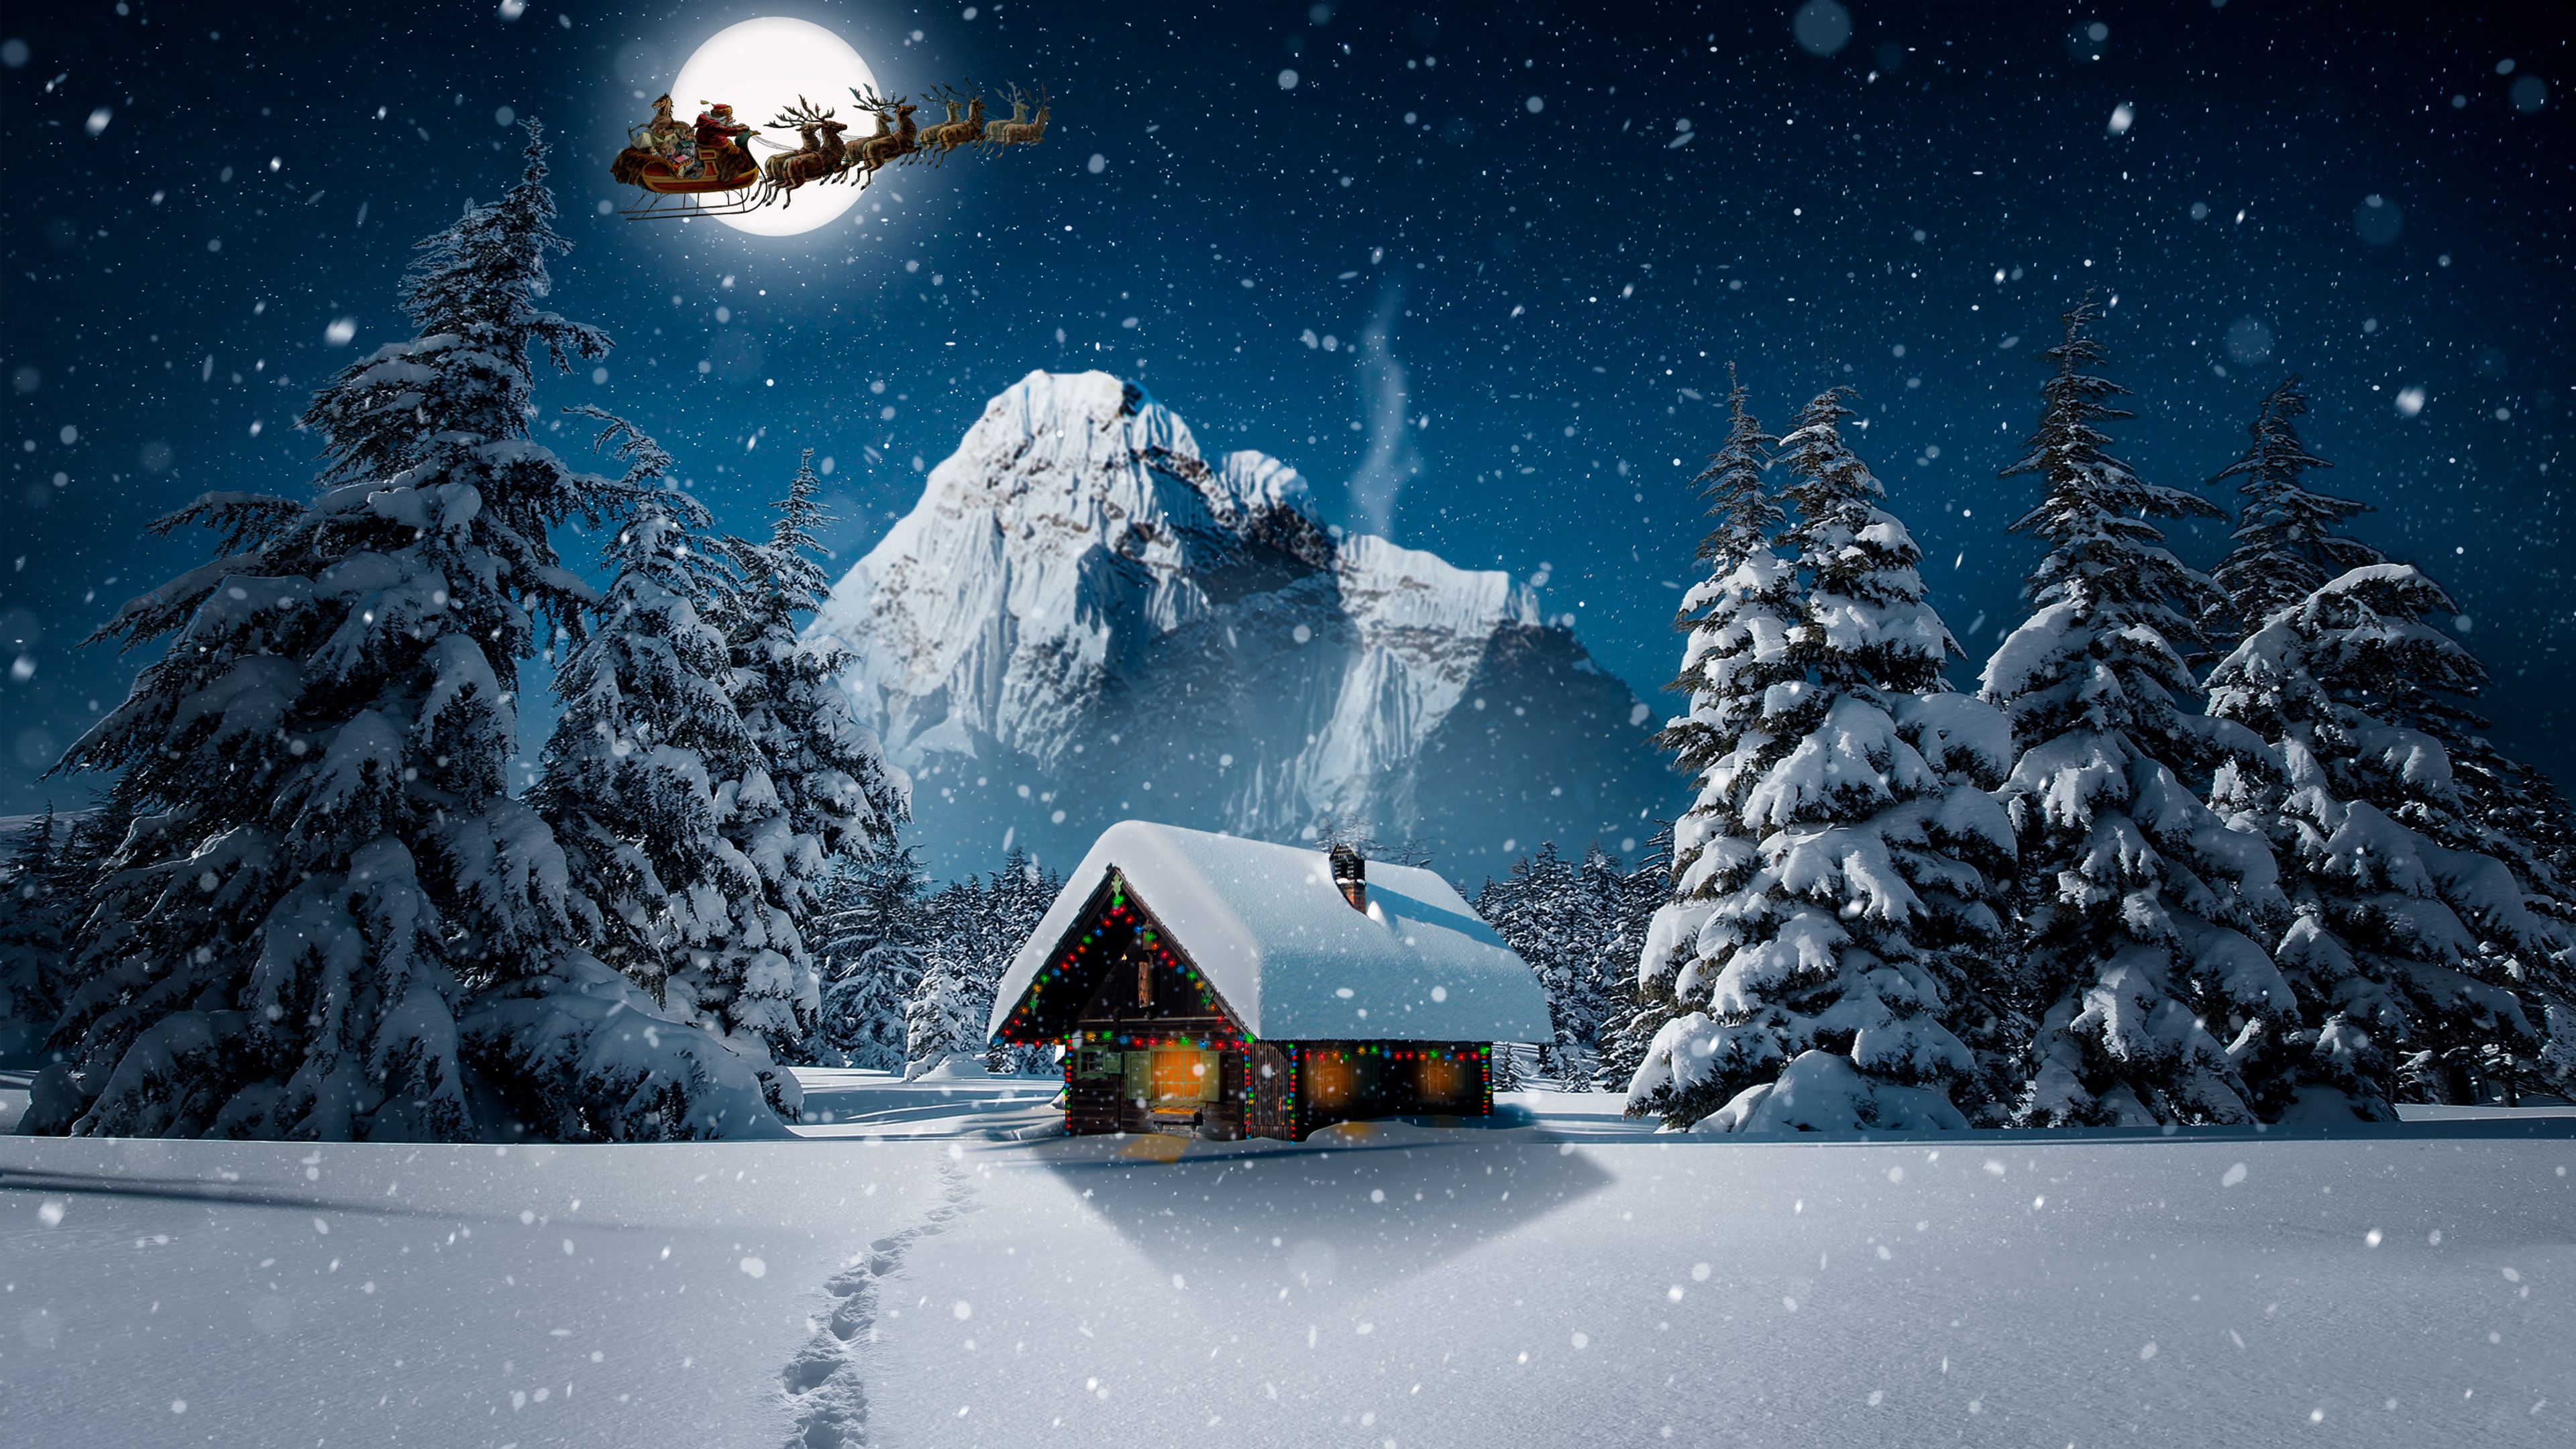 Santa Claus flies over a snowy house for Christmas Desktop wallpapers 1024x768